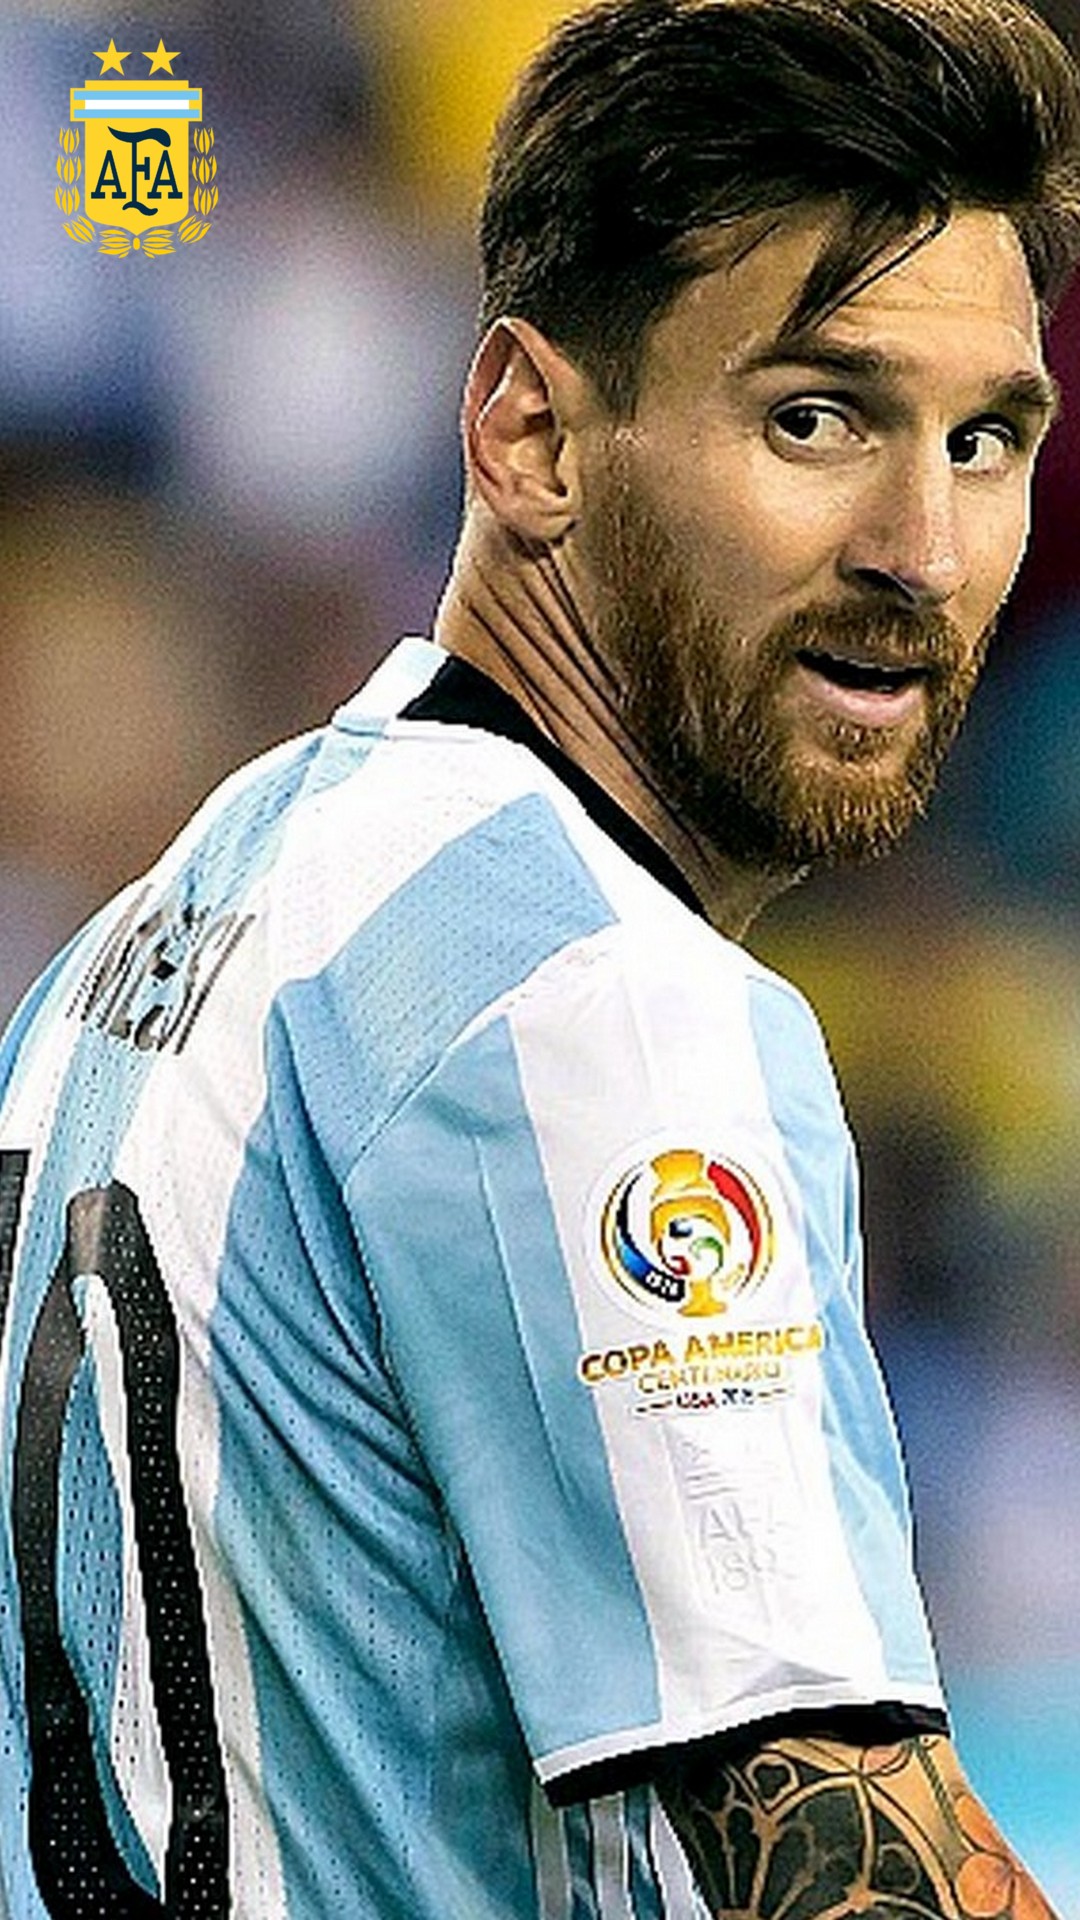 Messi Argentina Wallpaper For iPhone with image resolution 1080x1920 pixel. You can make this wallpaper for your iPhone 5, 6, 7, 8, X backgrounds, Mobile Screensaver, or iPad Lock Screen